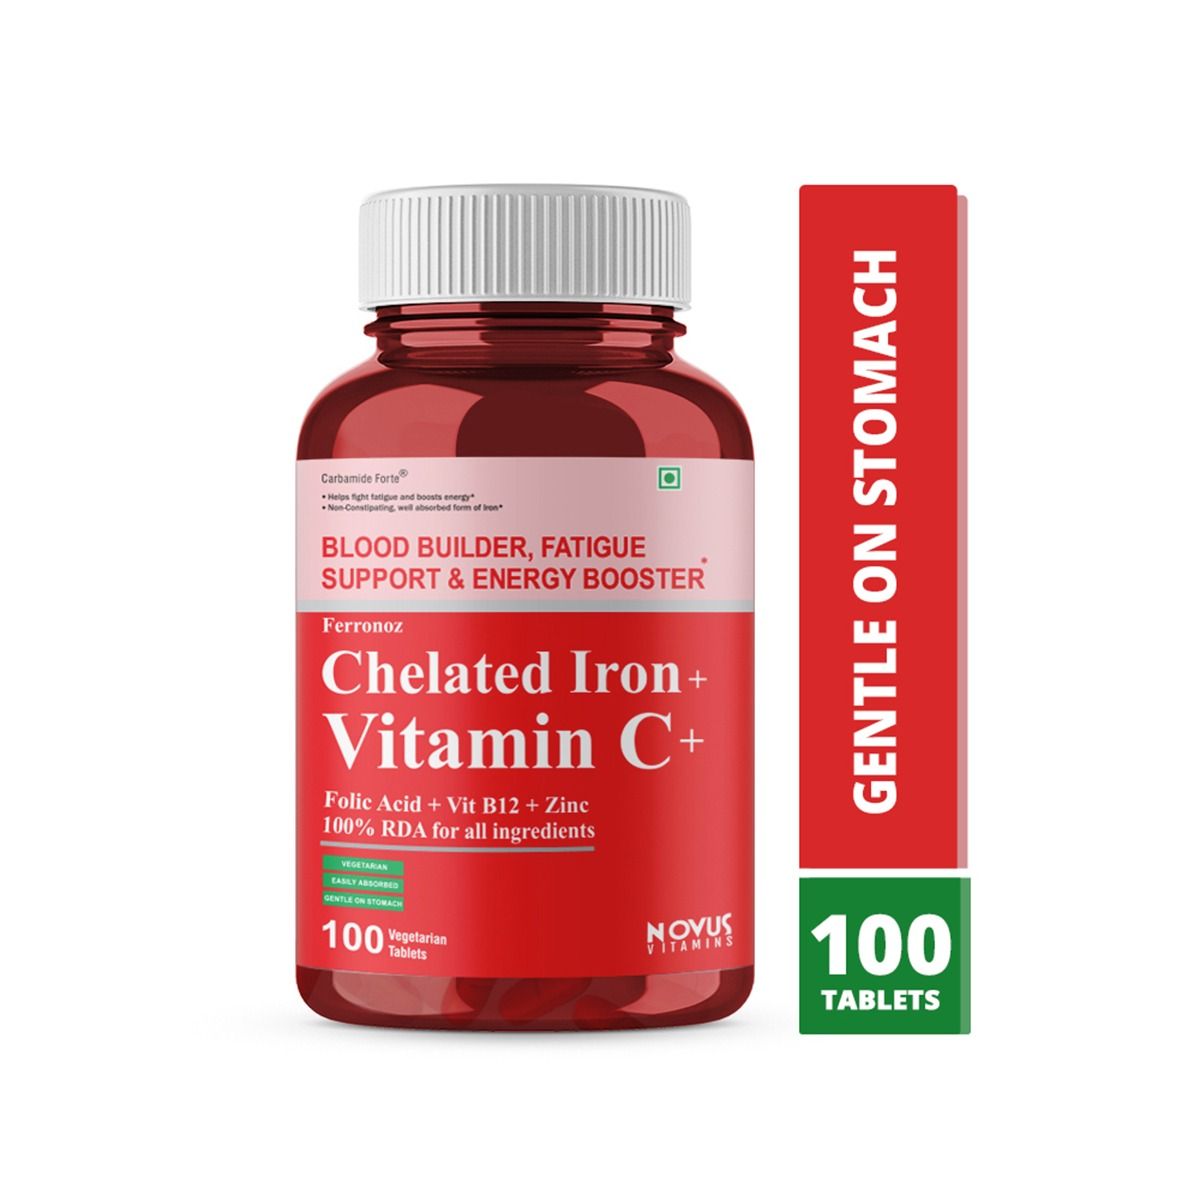 Carbamide Forte Chelated Iron + Vitamin C + Vegetarian Tablets, 100 Count, Pack of 1 